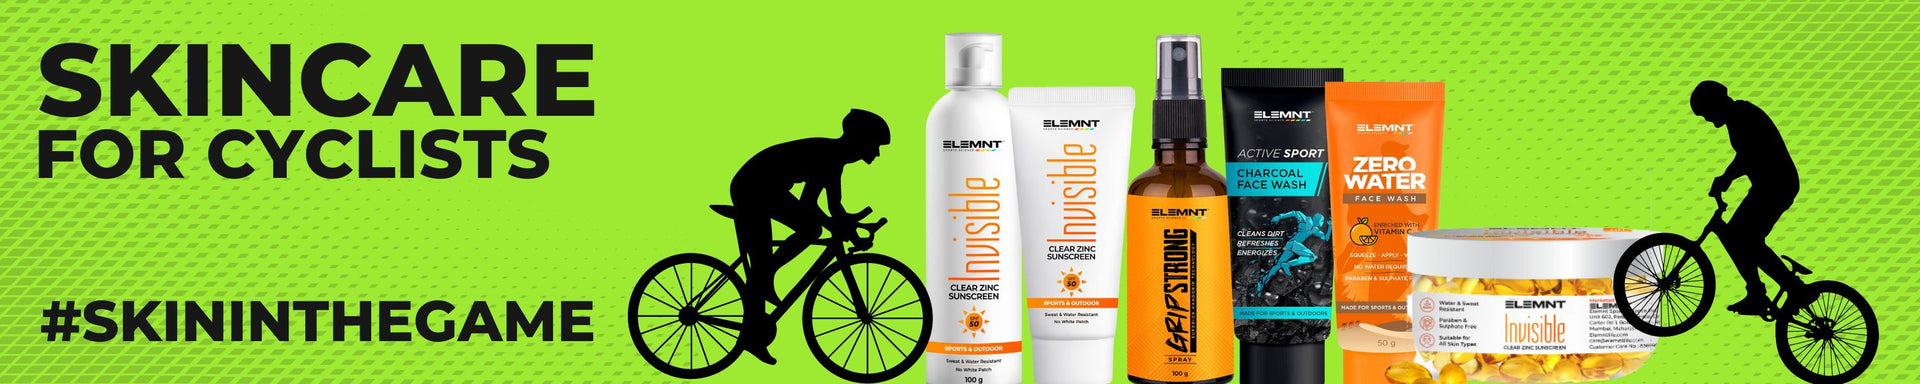 Skincare for Cyclists